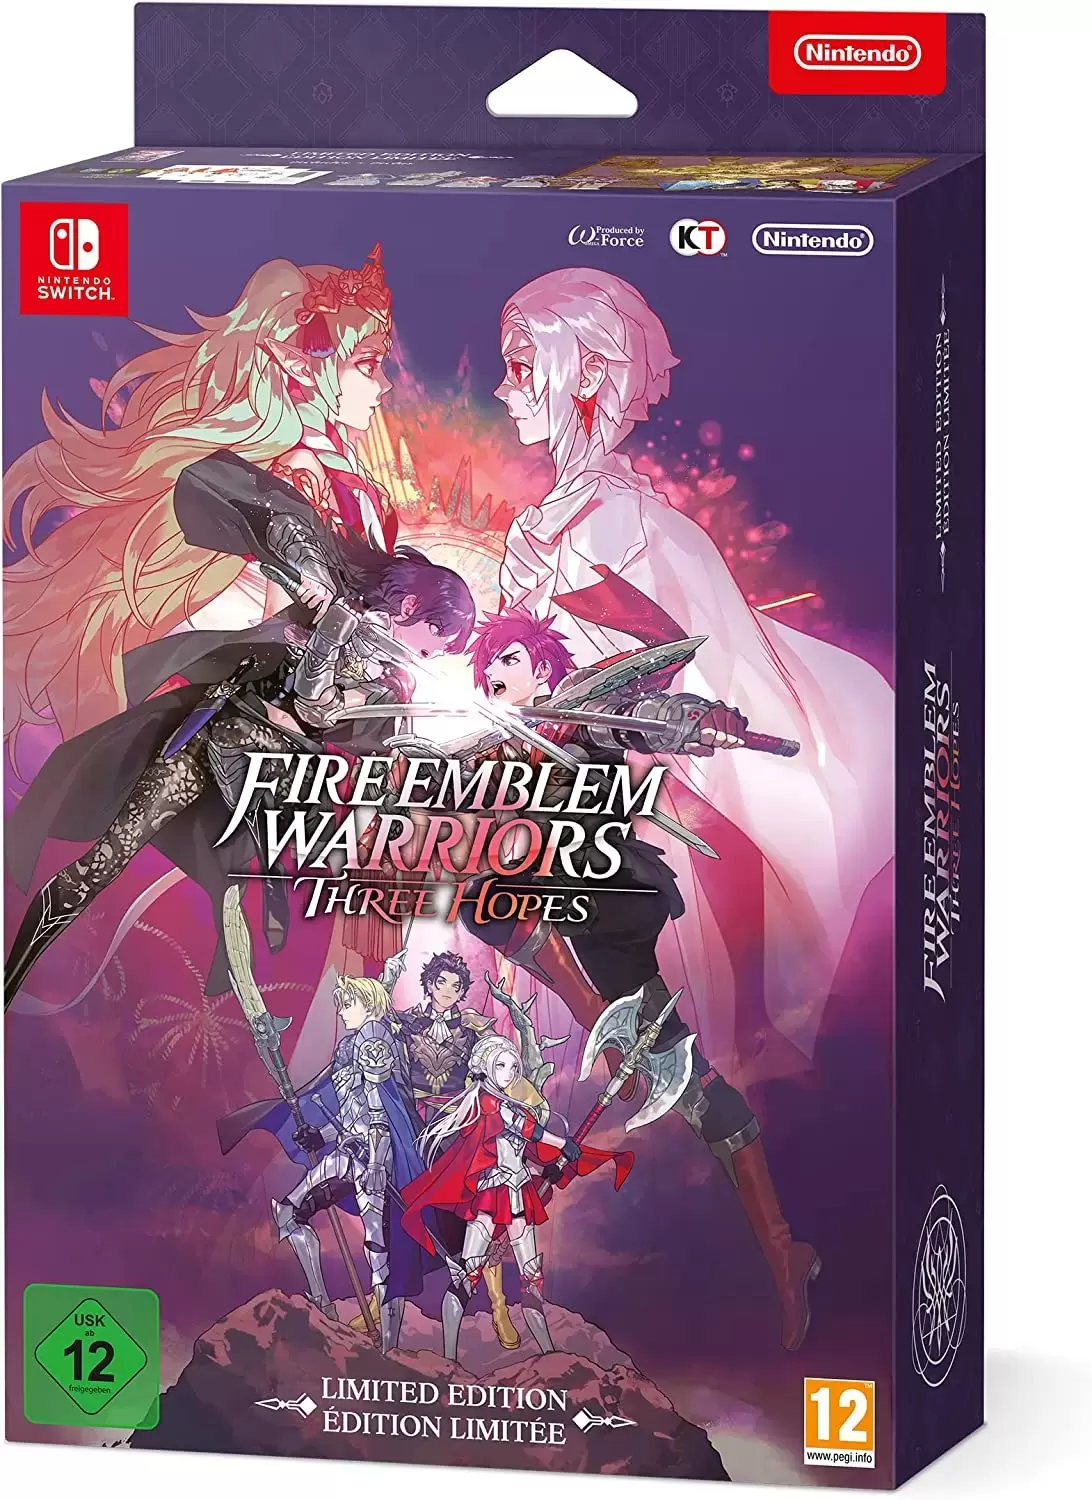 Nintendo Switch Games - Fire Emblem Warriors Three Hopes Limited Edition